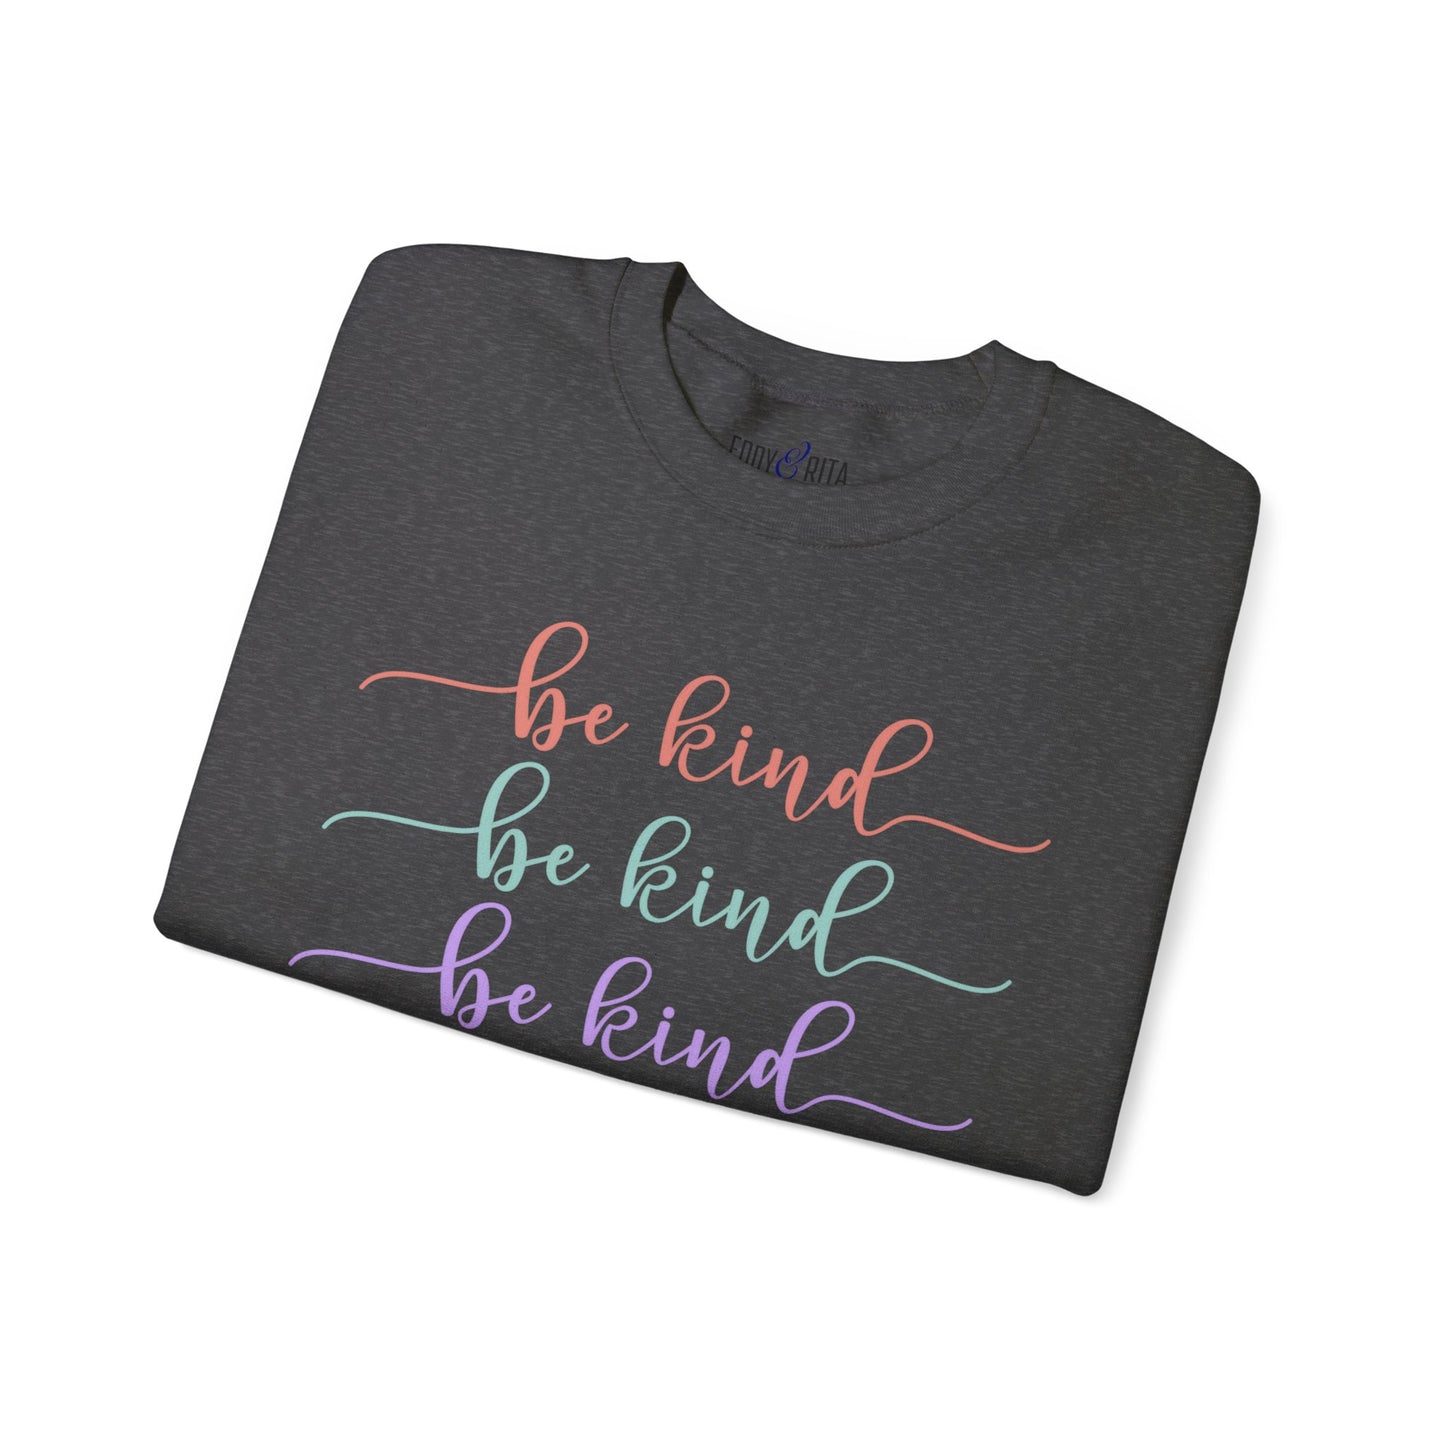 Be Kind: Women's Comfort Sweatshirt for Positive Vibes and Stylish Warmth